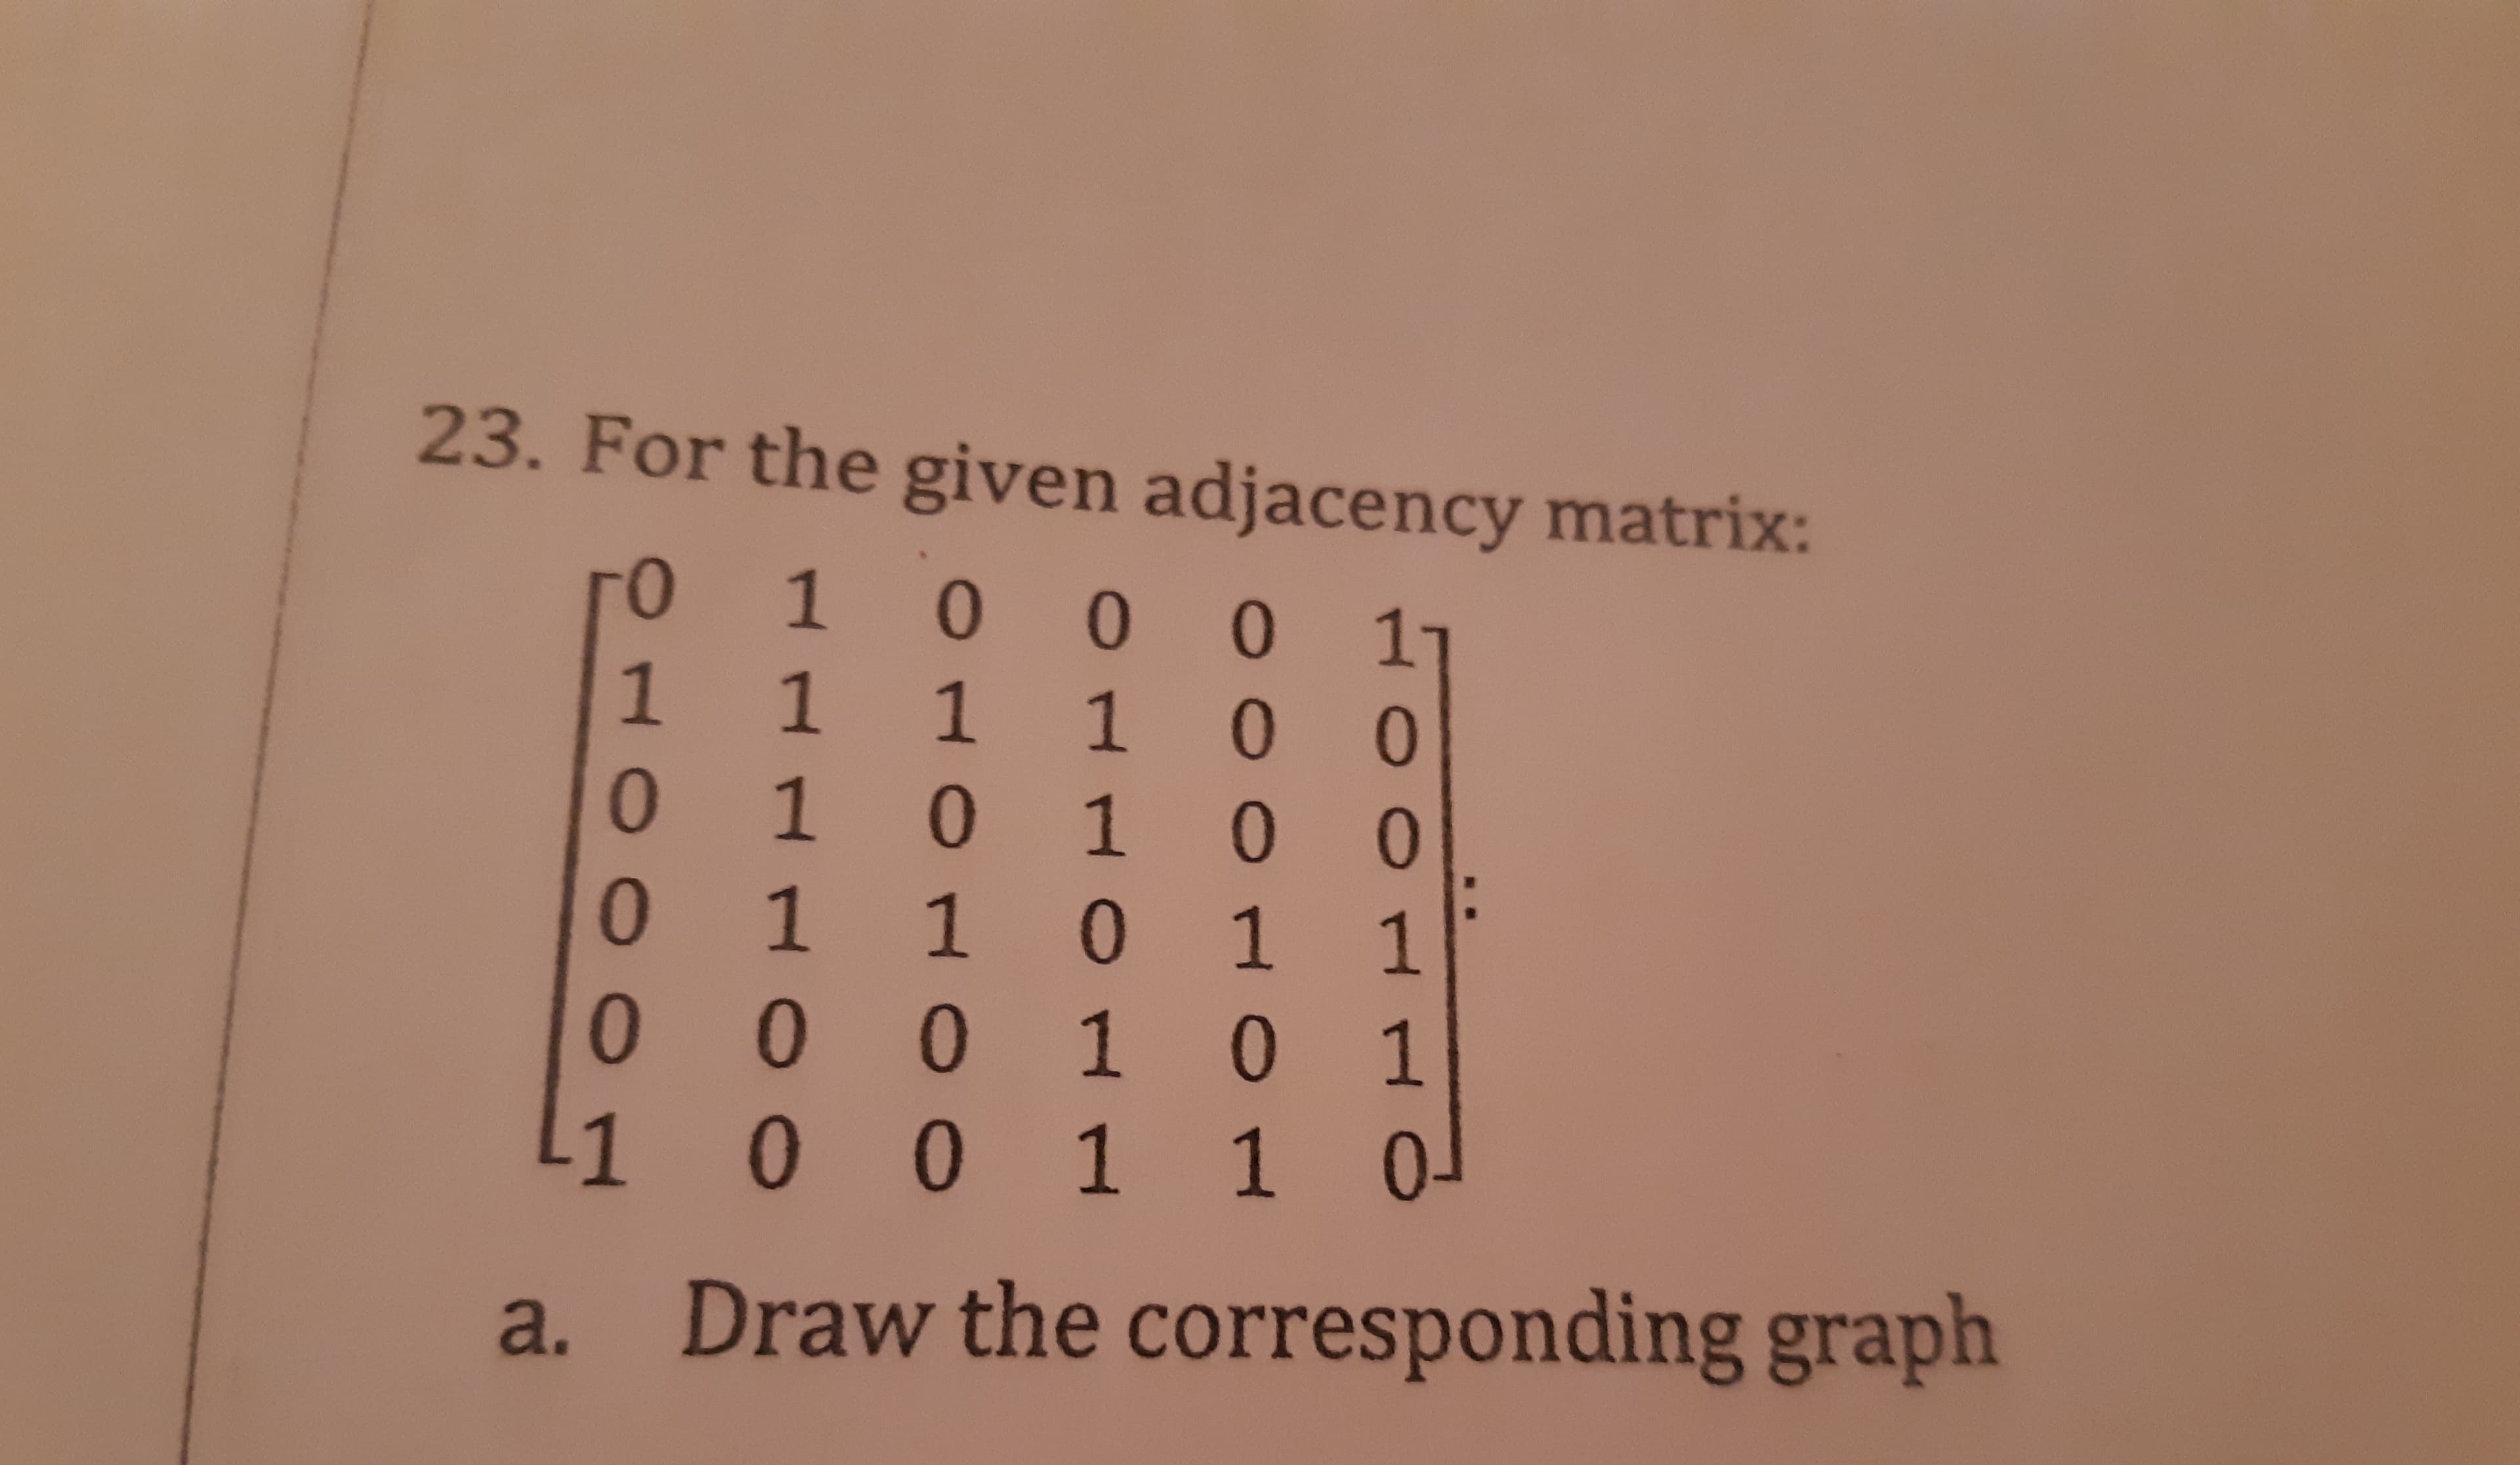 23. For the given adjacency matrix:
го
1
10
010
0
1 101
1
00 1 0 1
00 1 1
0
a.
Draw the corresponding graph
10007
